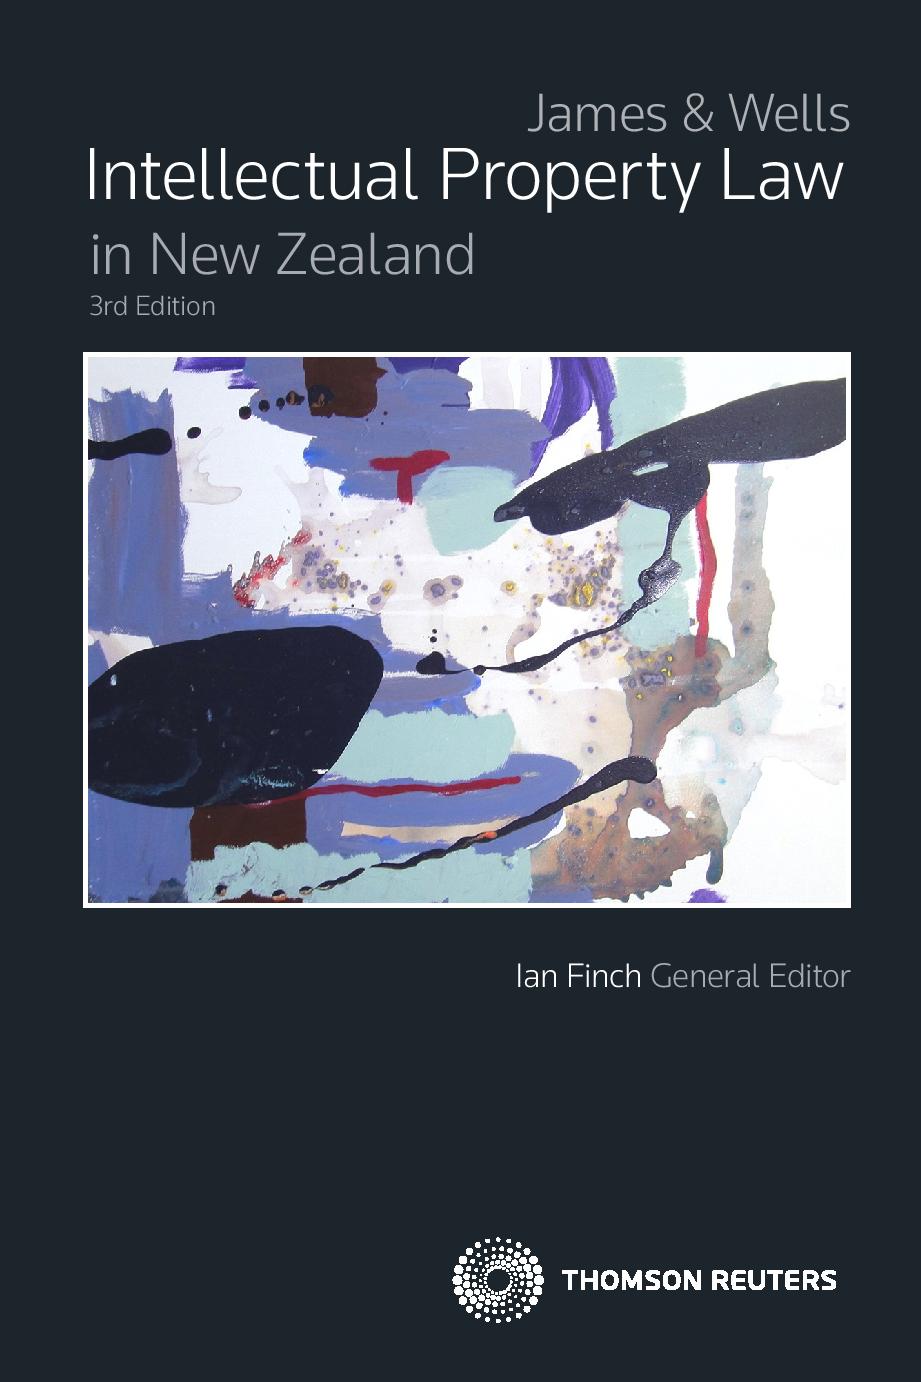 James & Wells Intellectual Property Law in New Zealand - 3rd Edition (Book + eBook Bundle)